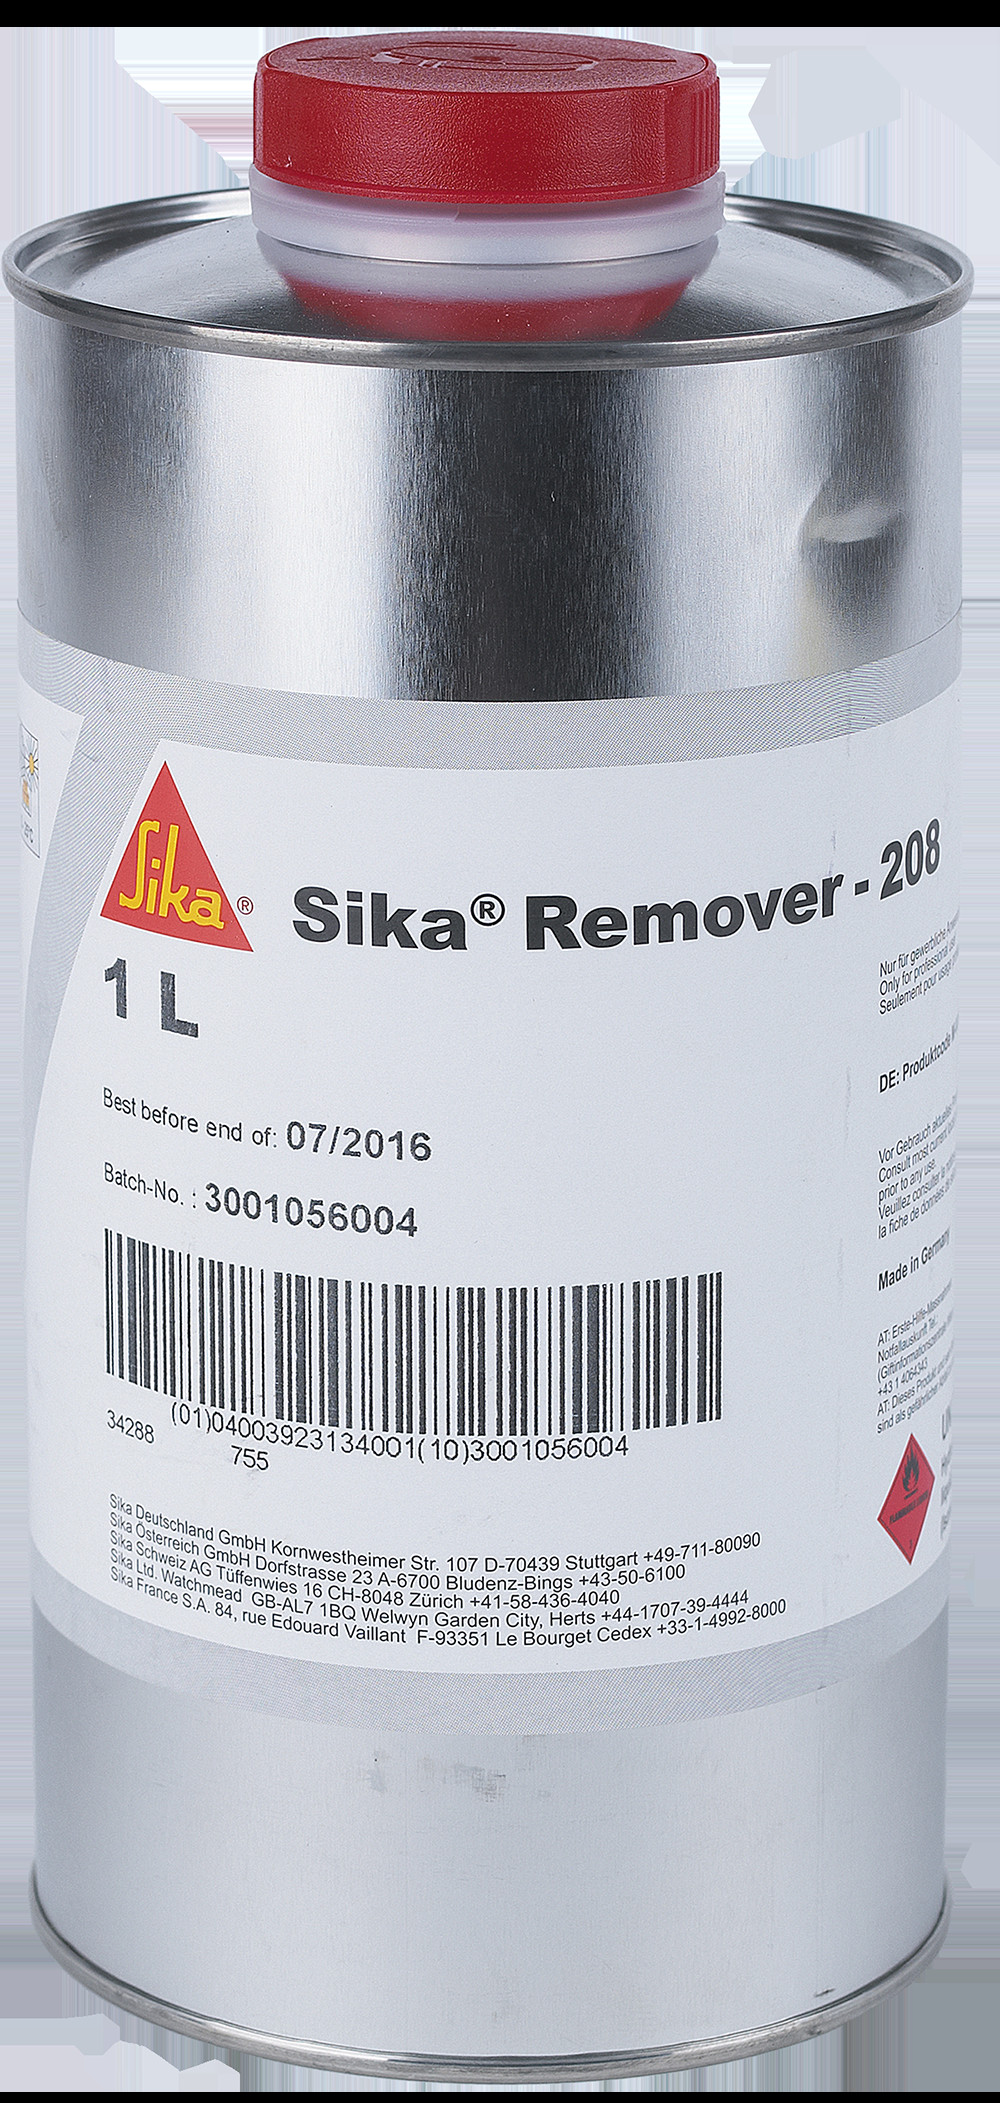 24 Lovely Sika Hardwood Floor Glue 2024 free download sika hardwood floor glue of sika remover 208 everbuild regarding sika remover 208 is a solvent based cleaner for removing traces of uncured adhesives or sealants from application tools or fr